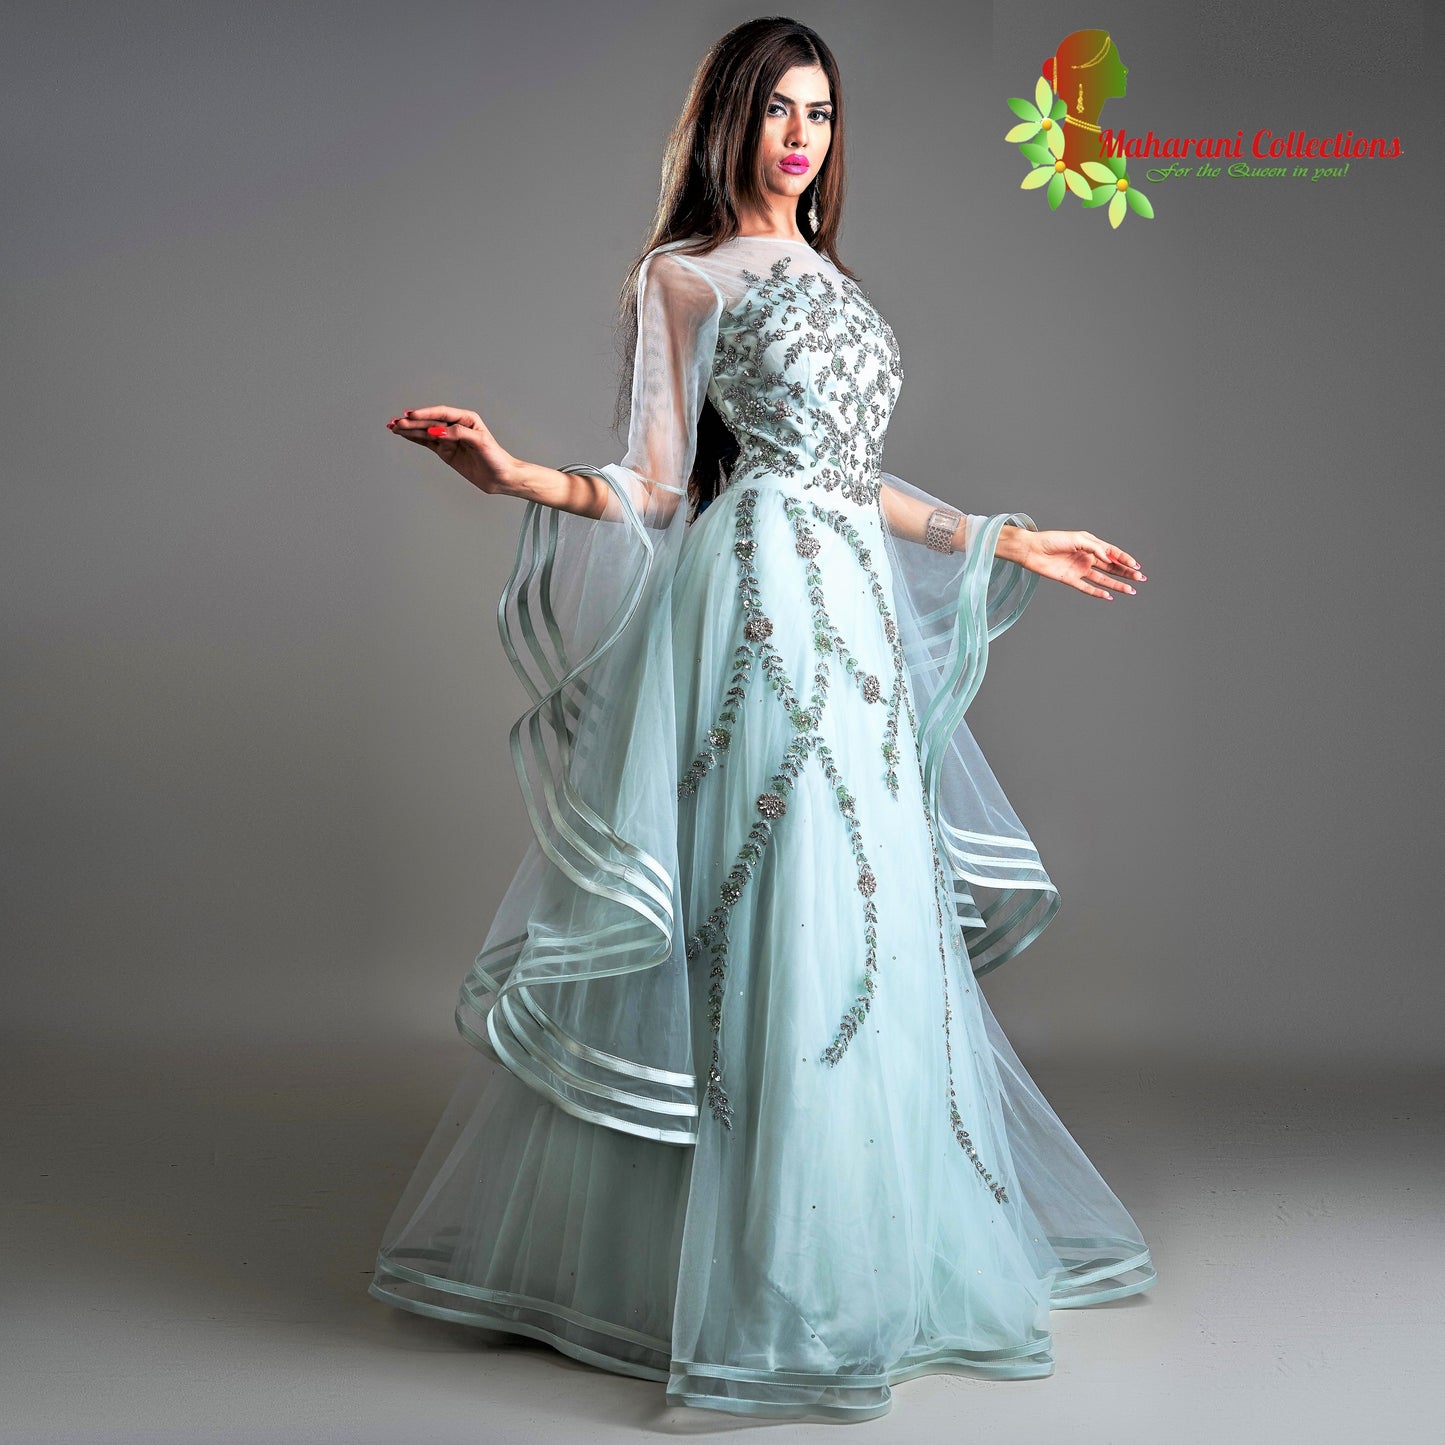 Designer Ball (Princess) Gown - Light Sea Green with Net, Beads, Sequins and Thread Work